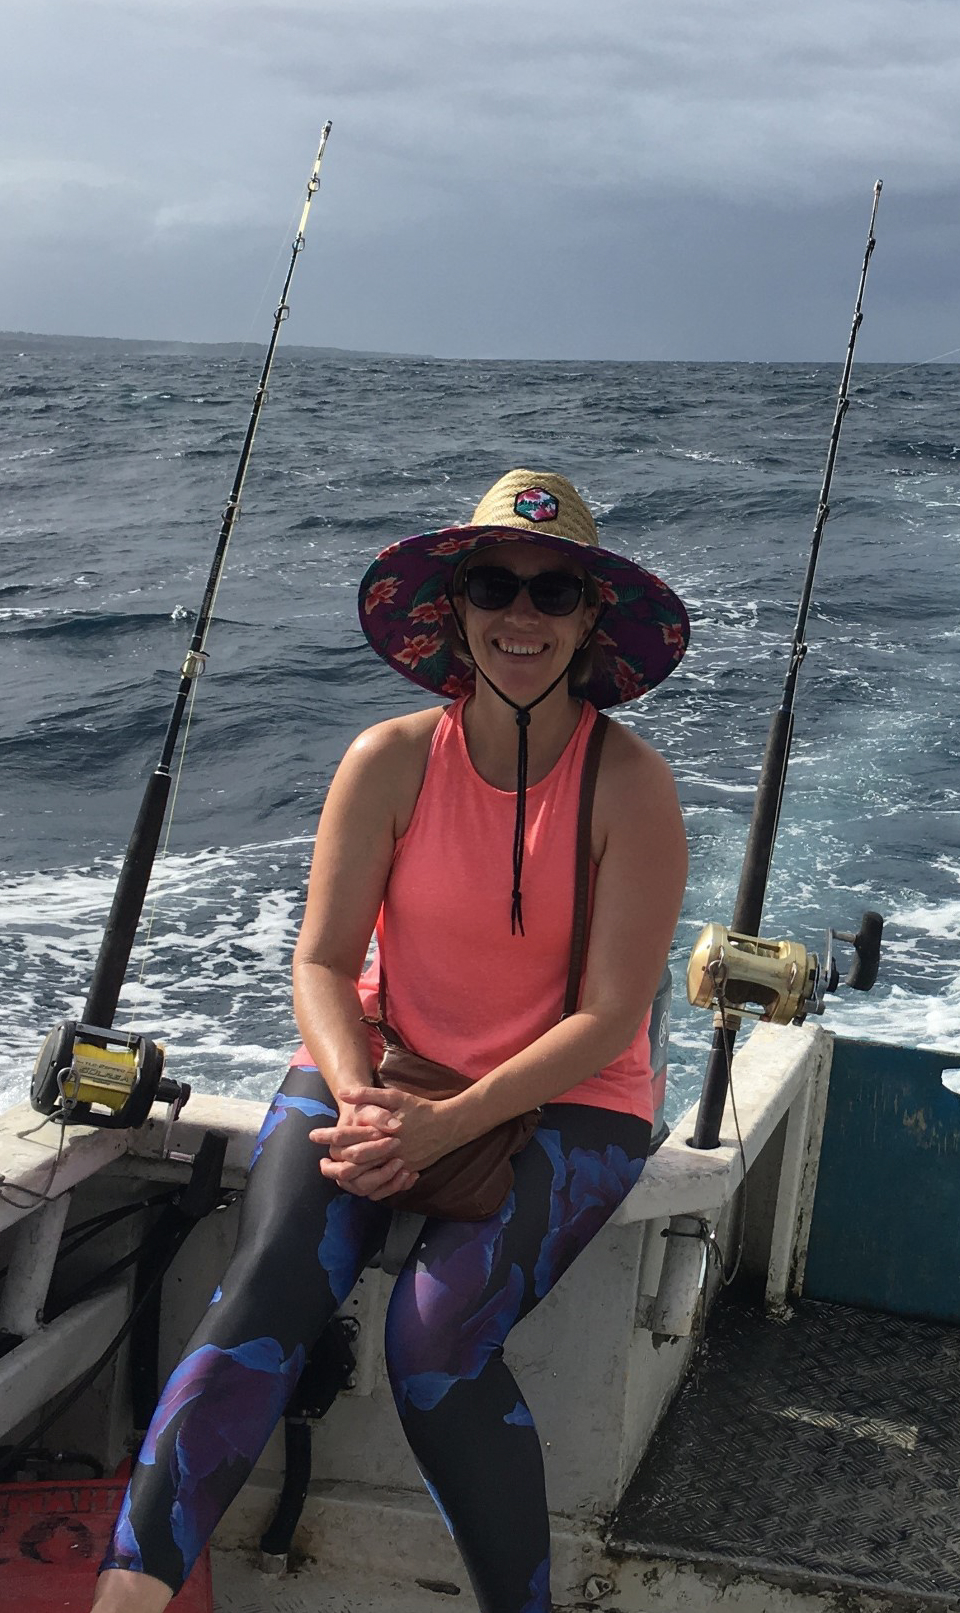 Nicole is smiling while sitting on a moving fishing boat between two large fishing rods. The beautiful Fiji ocean is in the background.